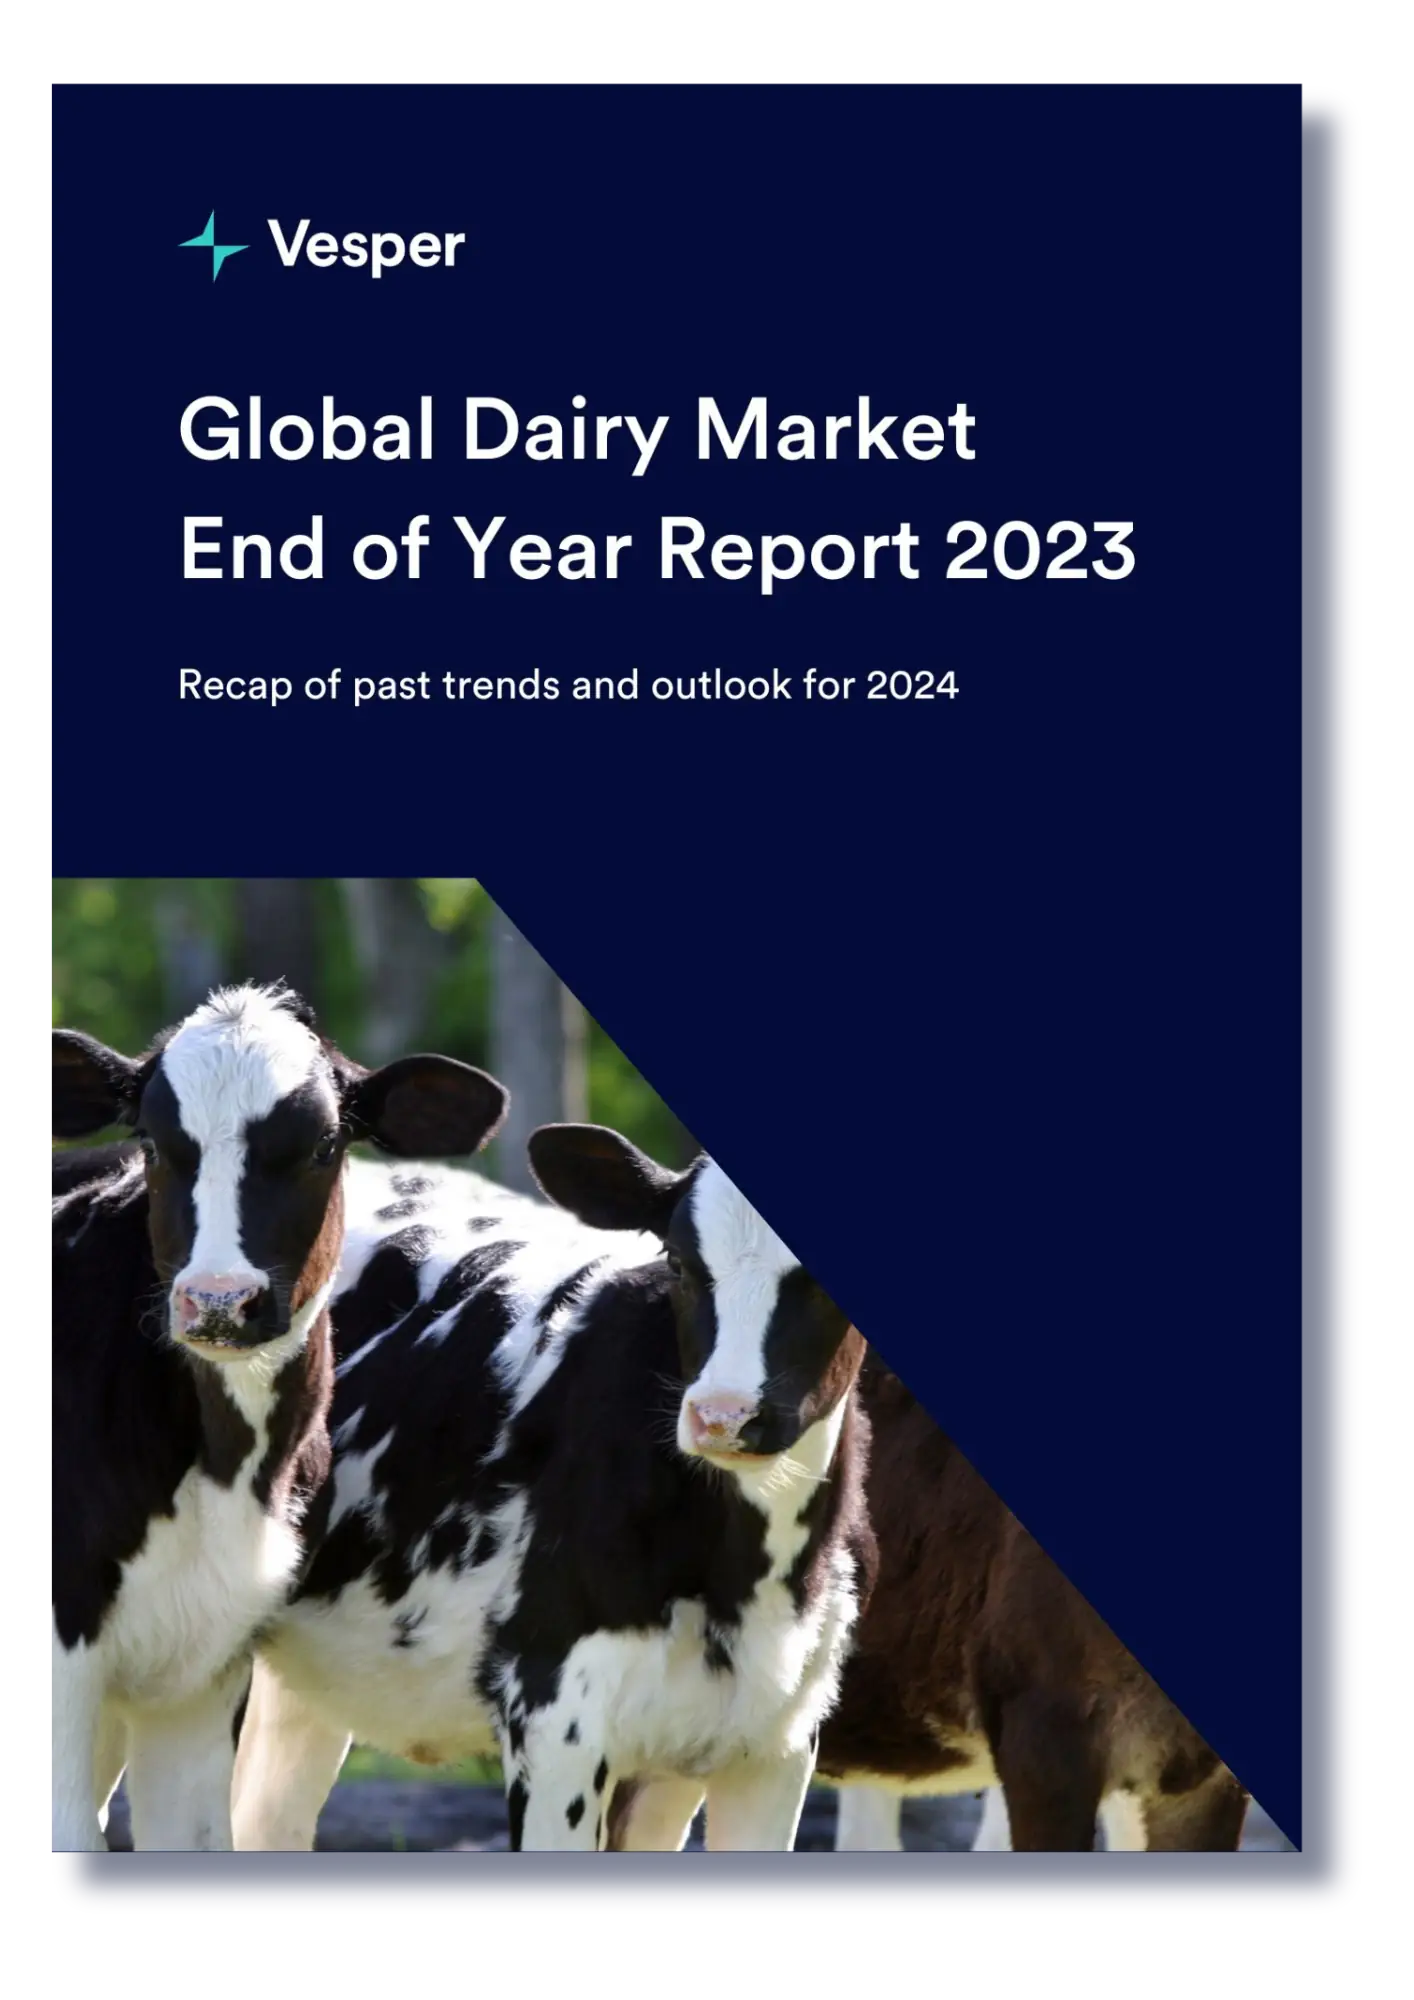 Global Dairy Market End of Year Report 2023